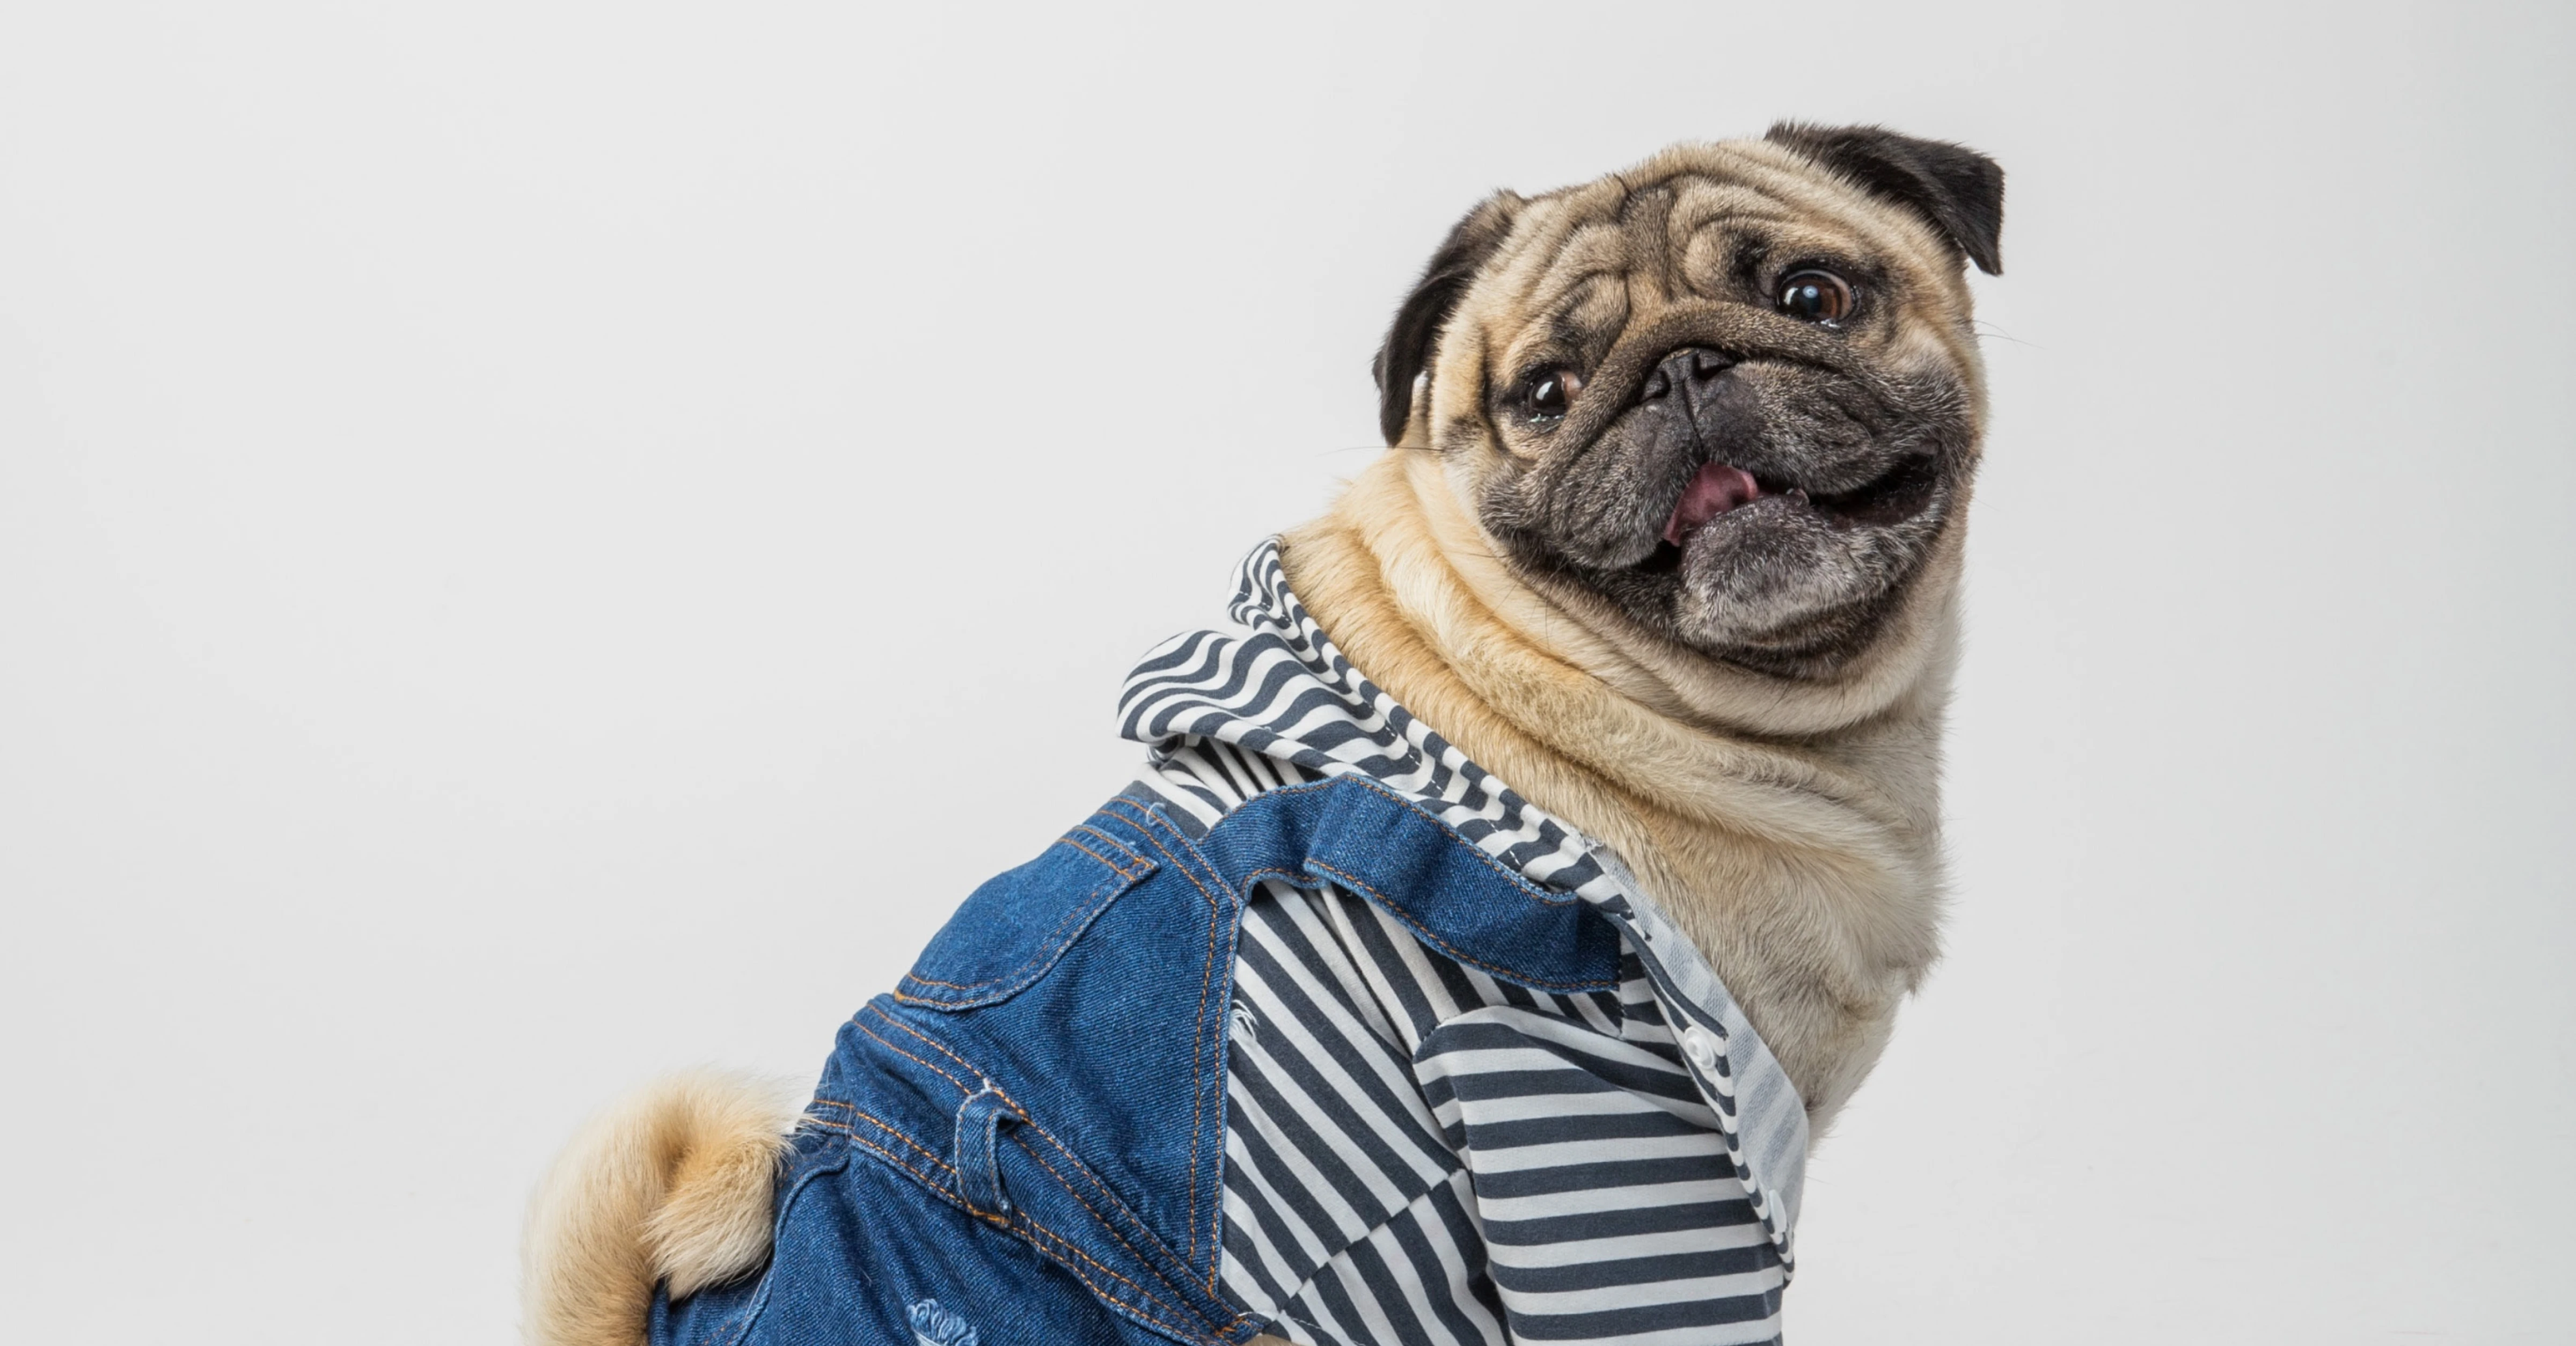 Pug Cover Photo from Unsplash